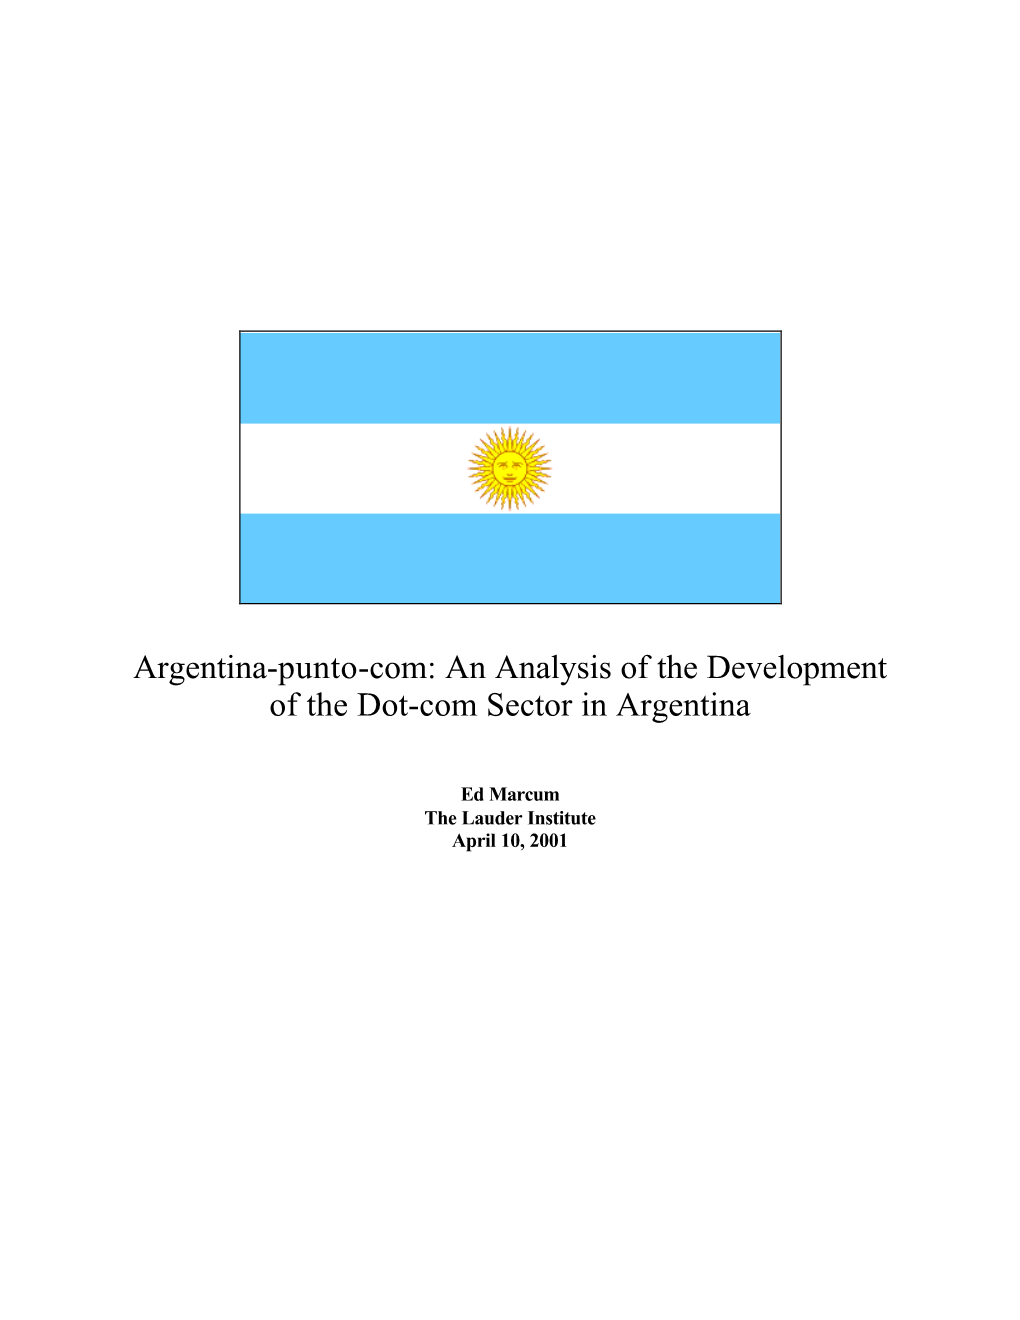 Argentina-Punto-Com: an Analysis of the Development of the Dot-Com Sector in Argentina